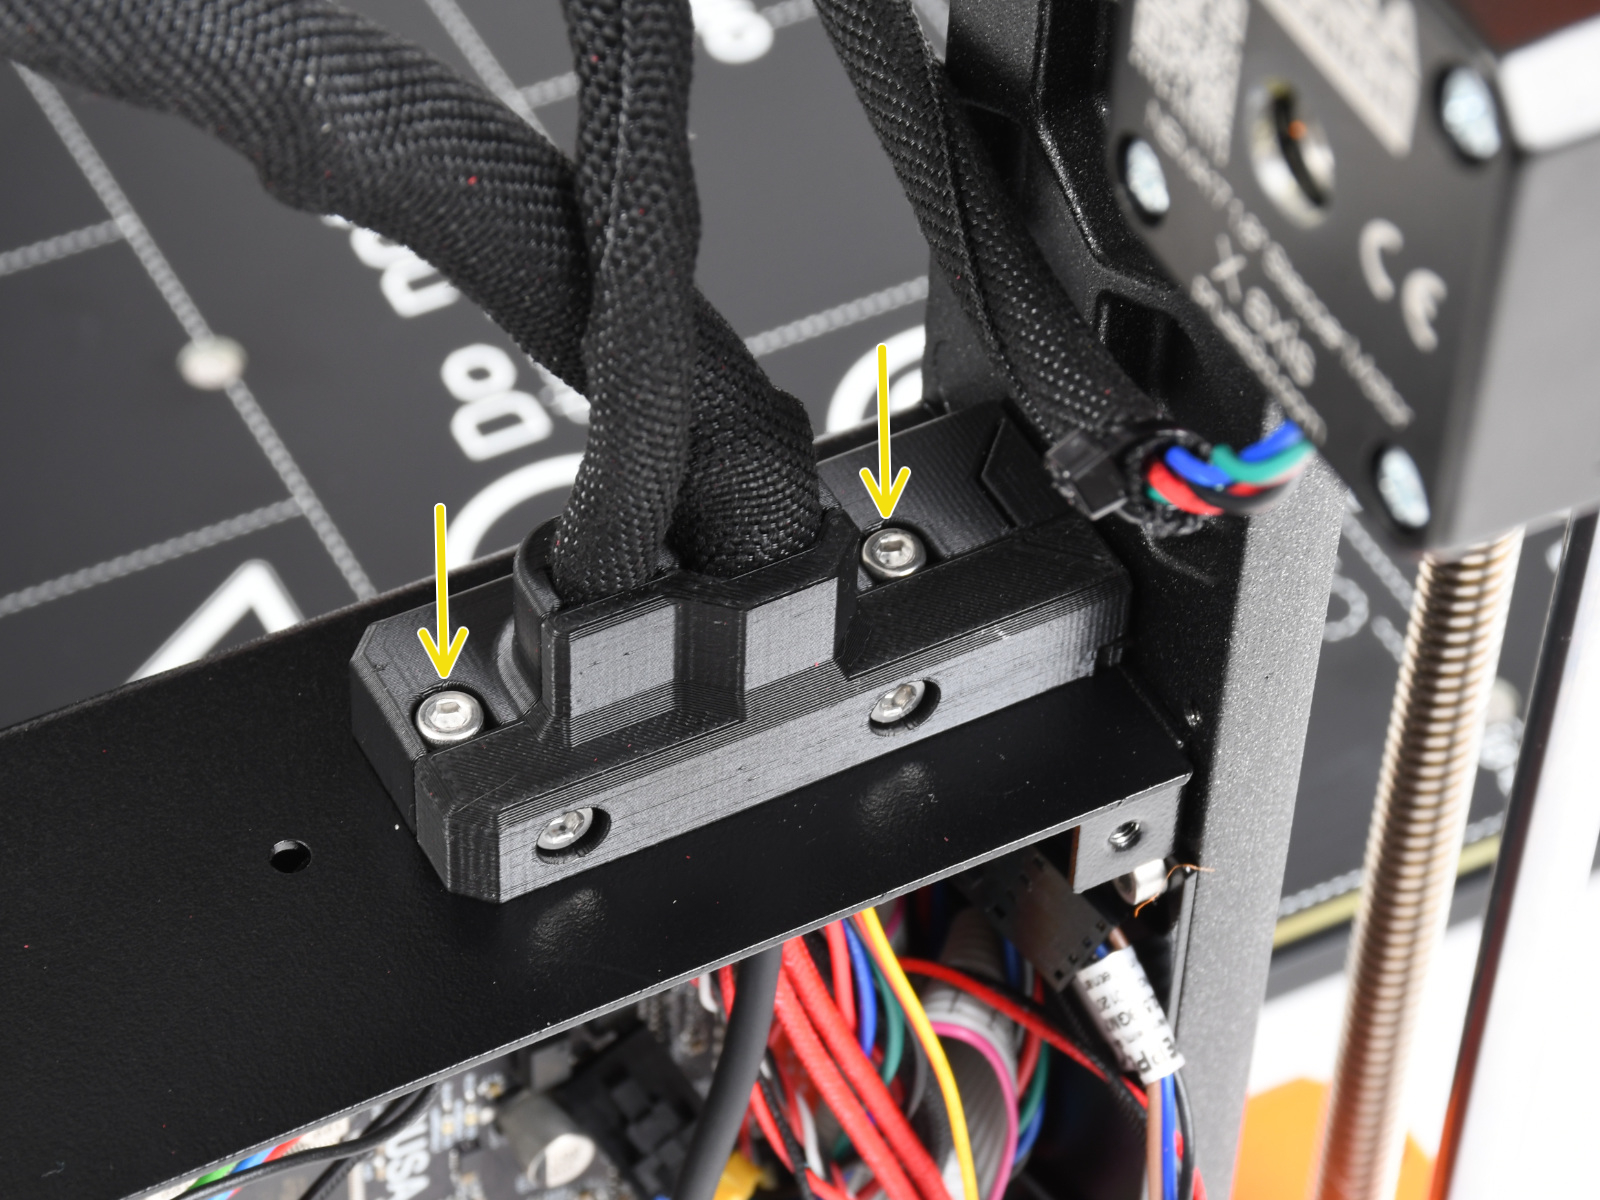 Attaching the extruder cable bundle